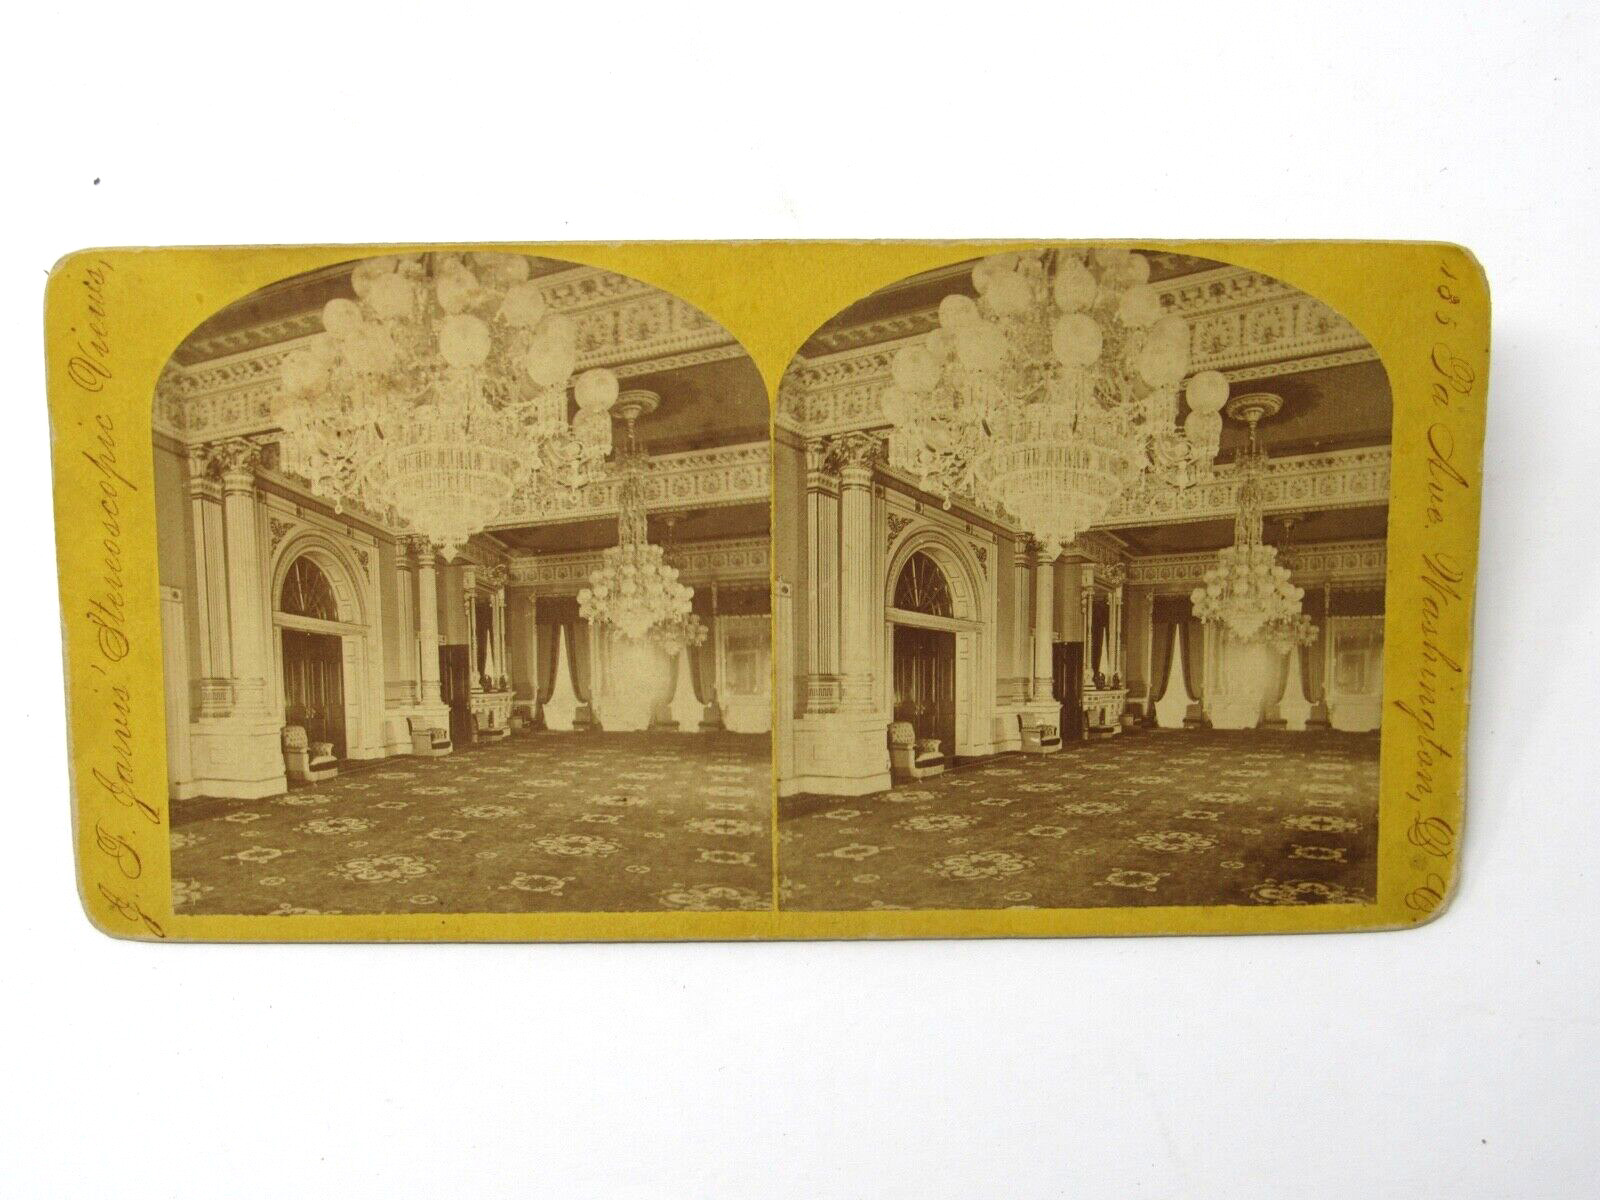 Washington D. C. White House East Room Chandelier Architecture Stereoview c1880